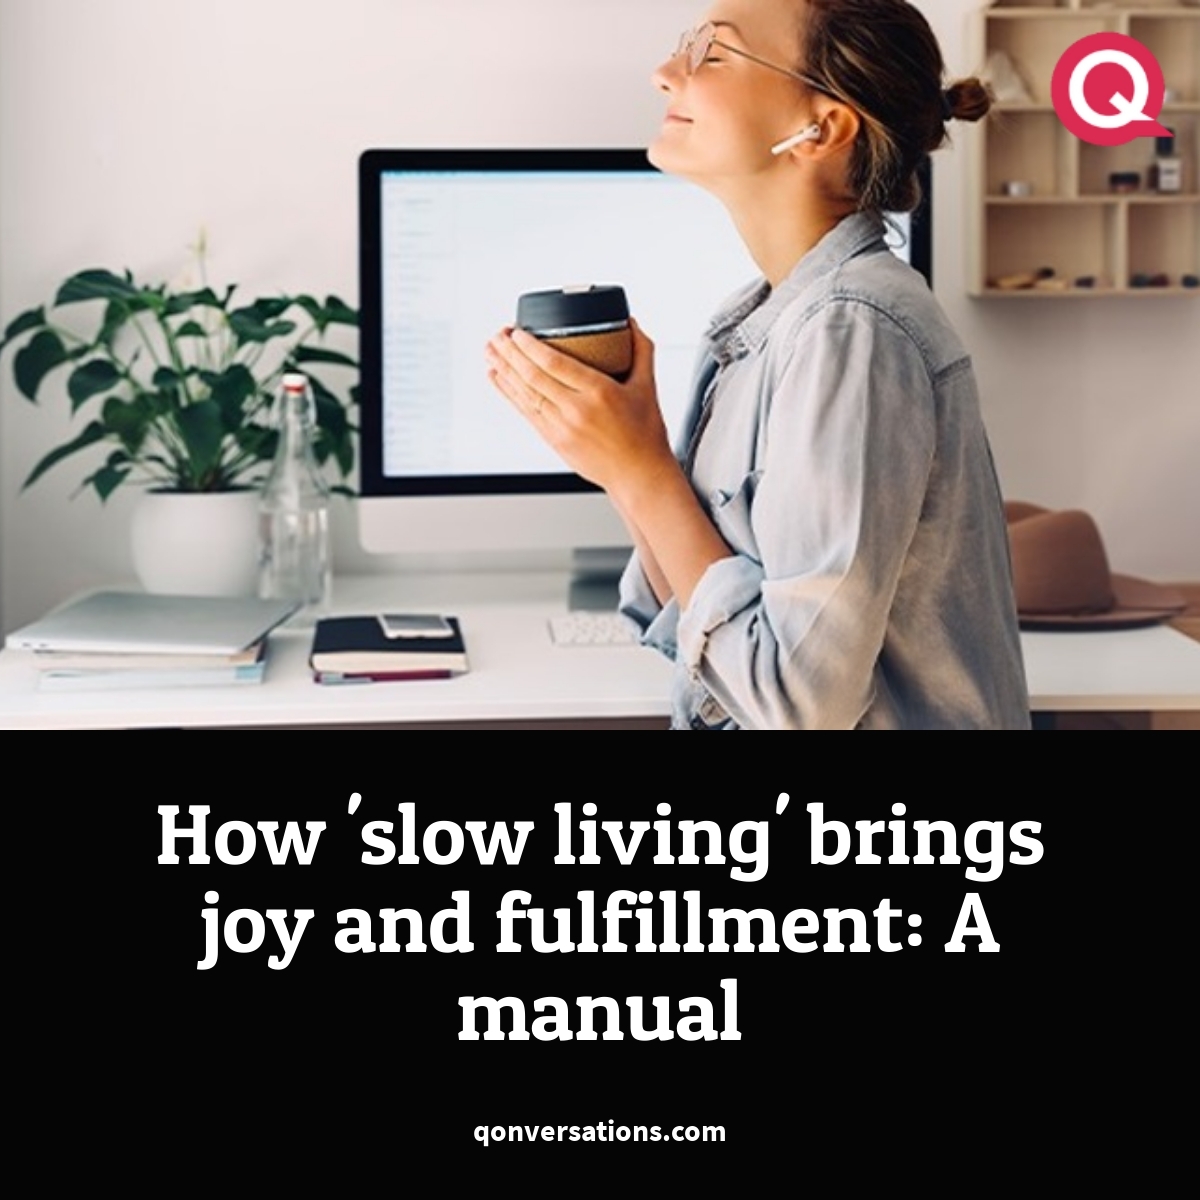 #MondayMood #slowliving Imagine waking up in the morning without hustling to get ready for work or school. Slow living is fundamentally a #mindset—an intentional decision to live life more slowly. Find out more: qonversations.com/how-slow-livin…